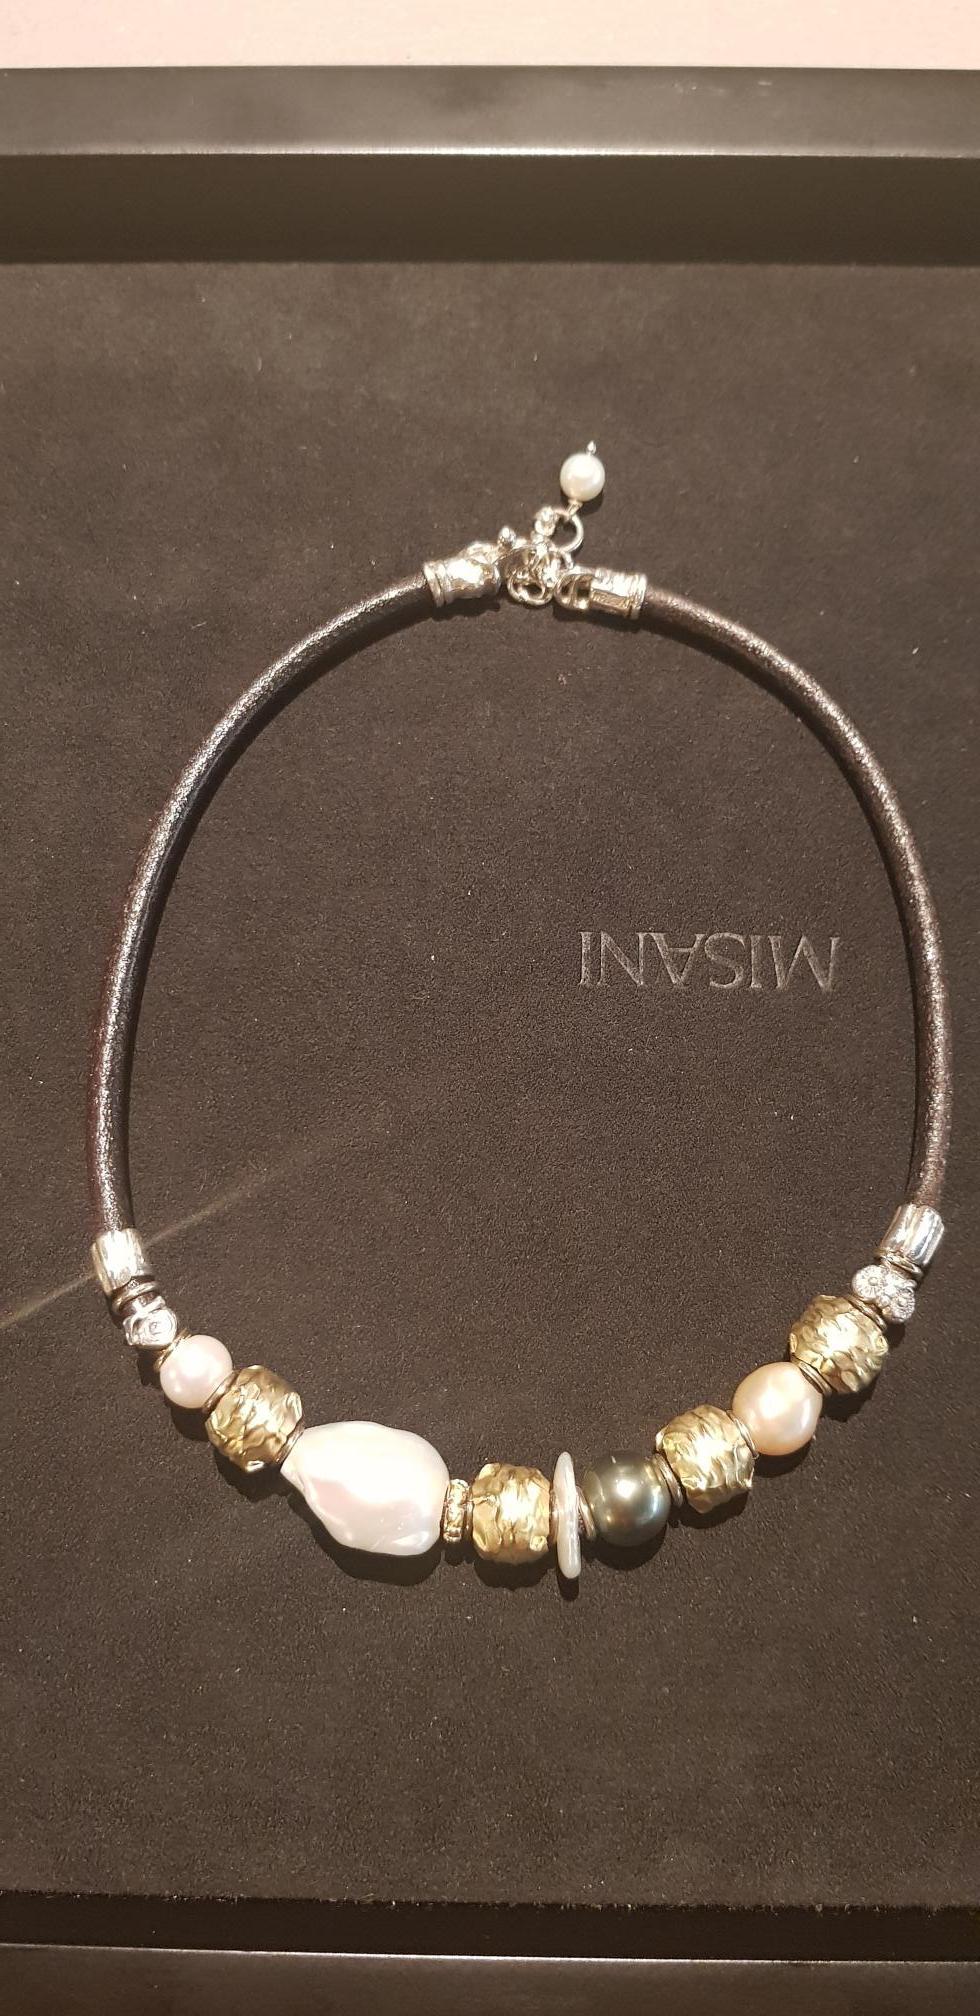 Beautiful necklace made by our italian artisans. It featured by certified florence leather, yellow gold 18k elements and different pearls, including the peach pearl, tahiti pearls and baroque.
